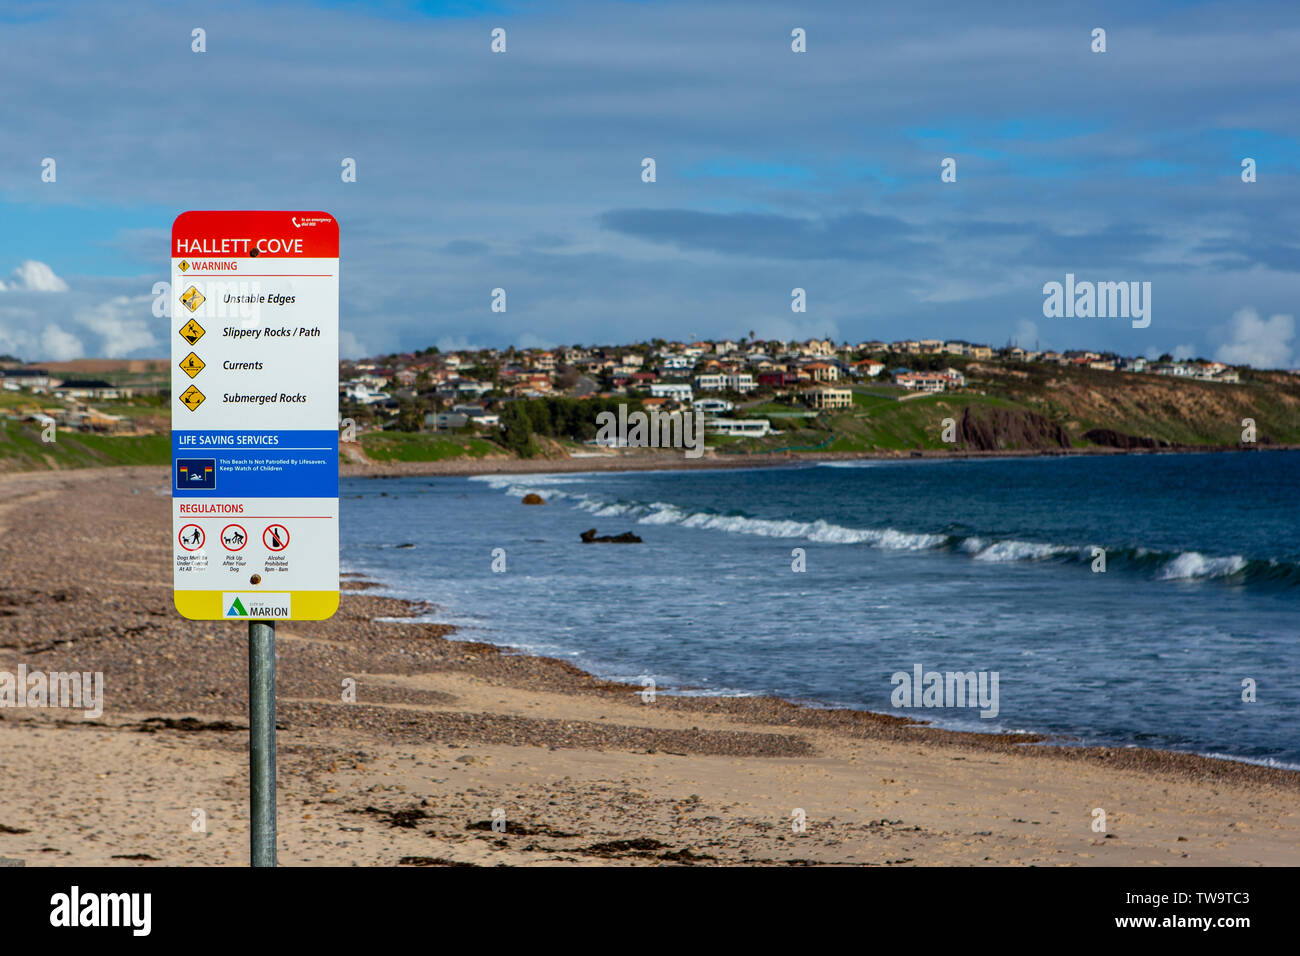 Hallett Cove beach from the conservation park in Hallett Cove South Australia on 19th June 2019 Stock Photo